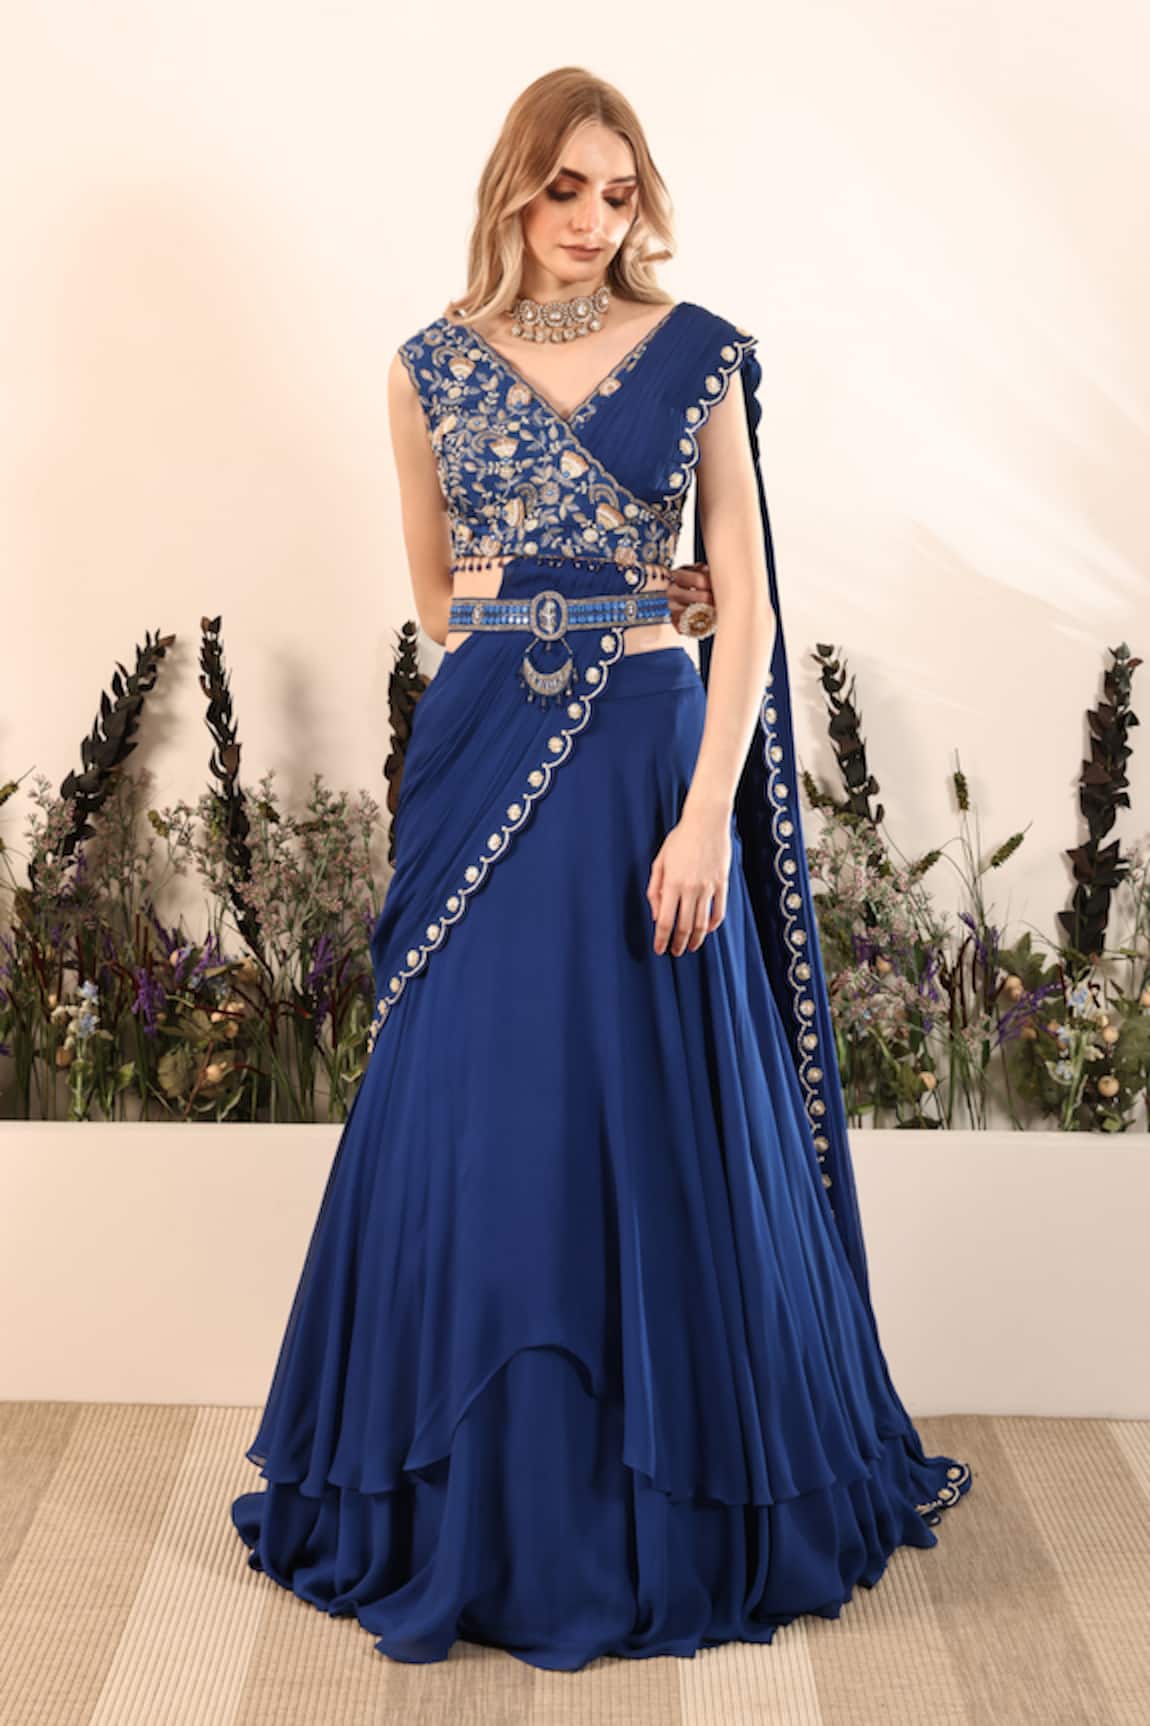 Nayna Kapoor Sapphire Serenade Pre-Draped Saree With Blouse